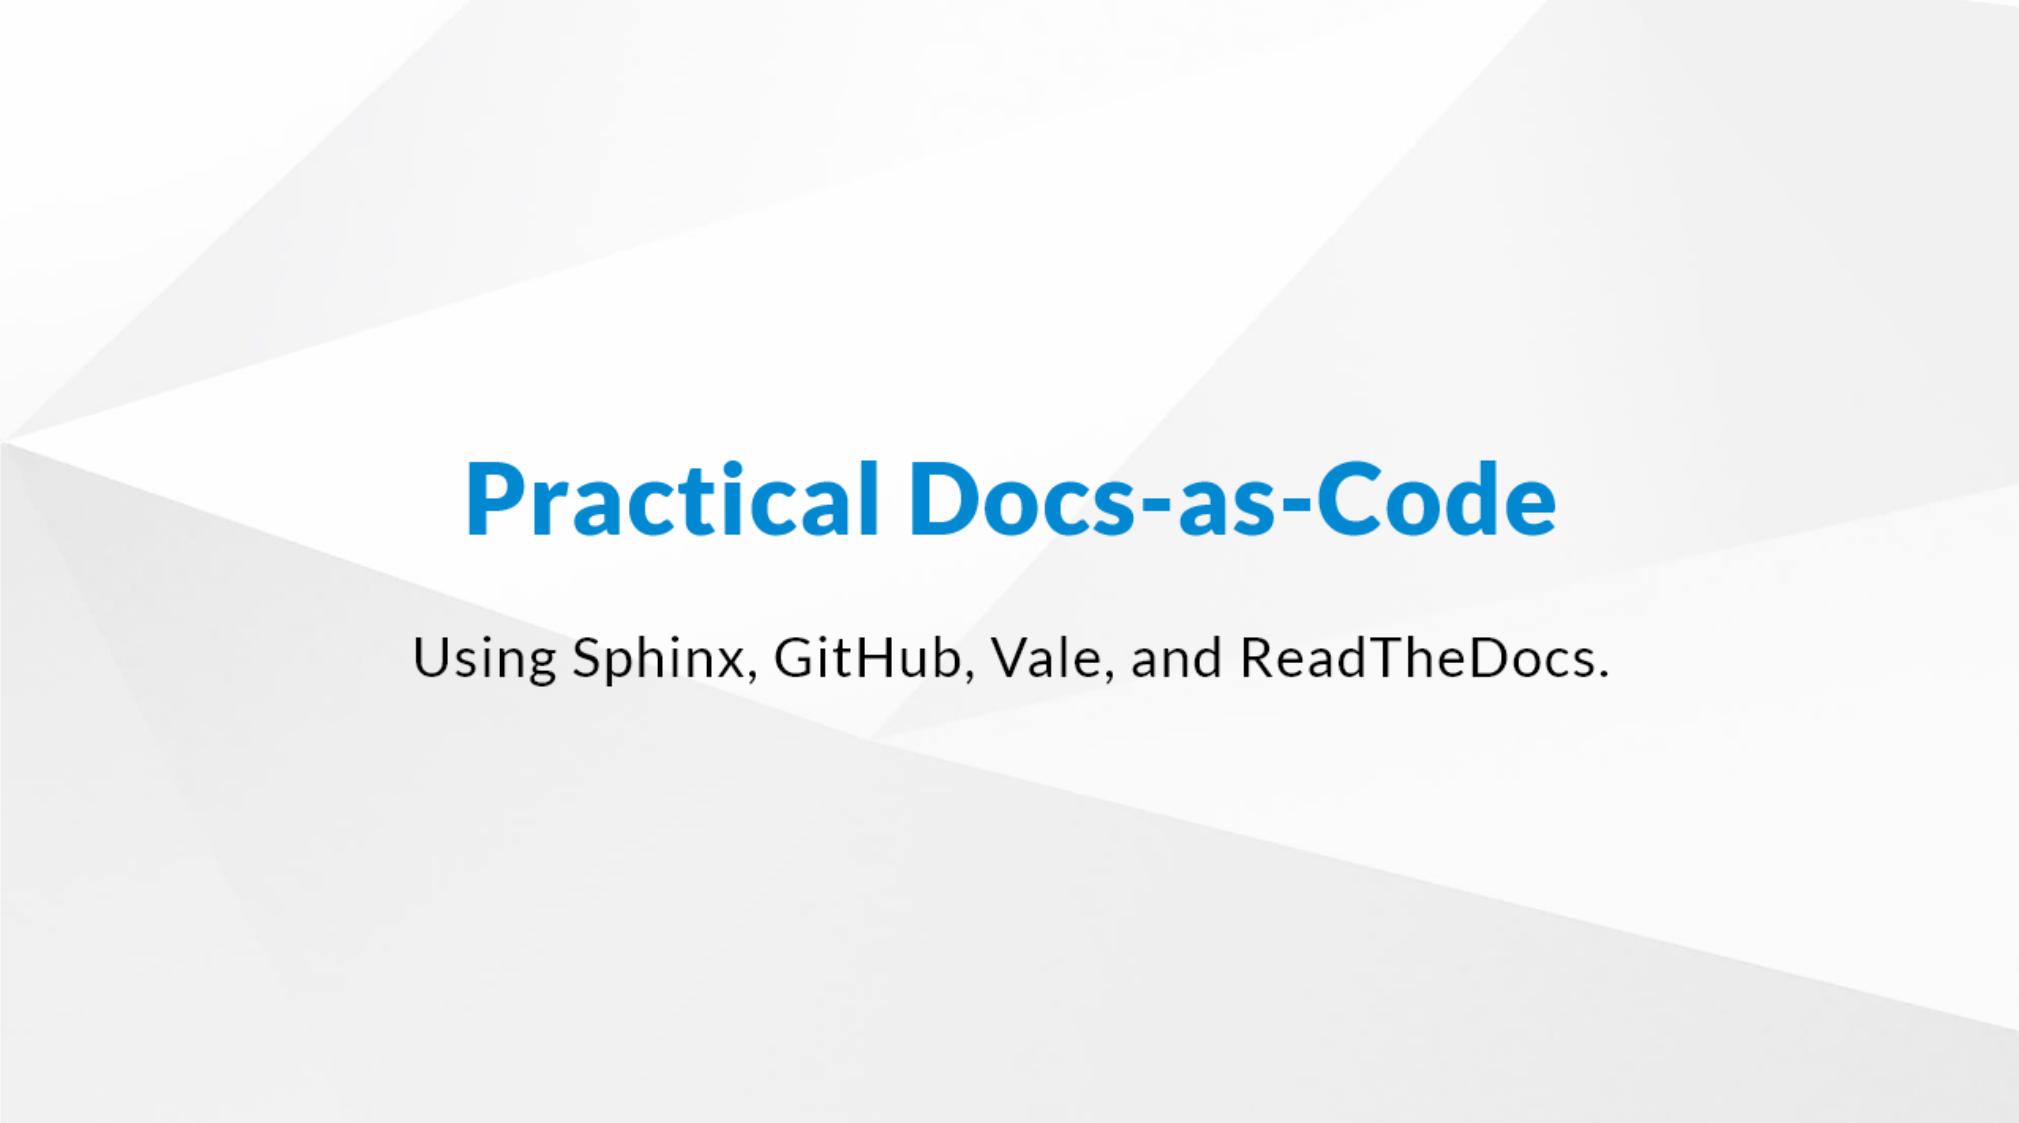 A practical introduction to Documentation as Code